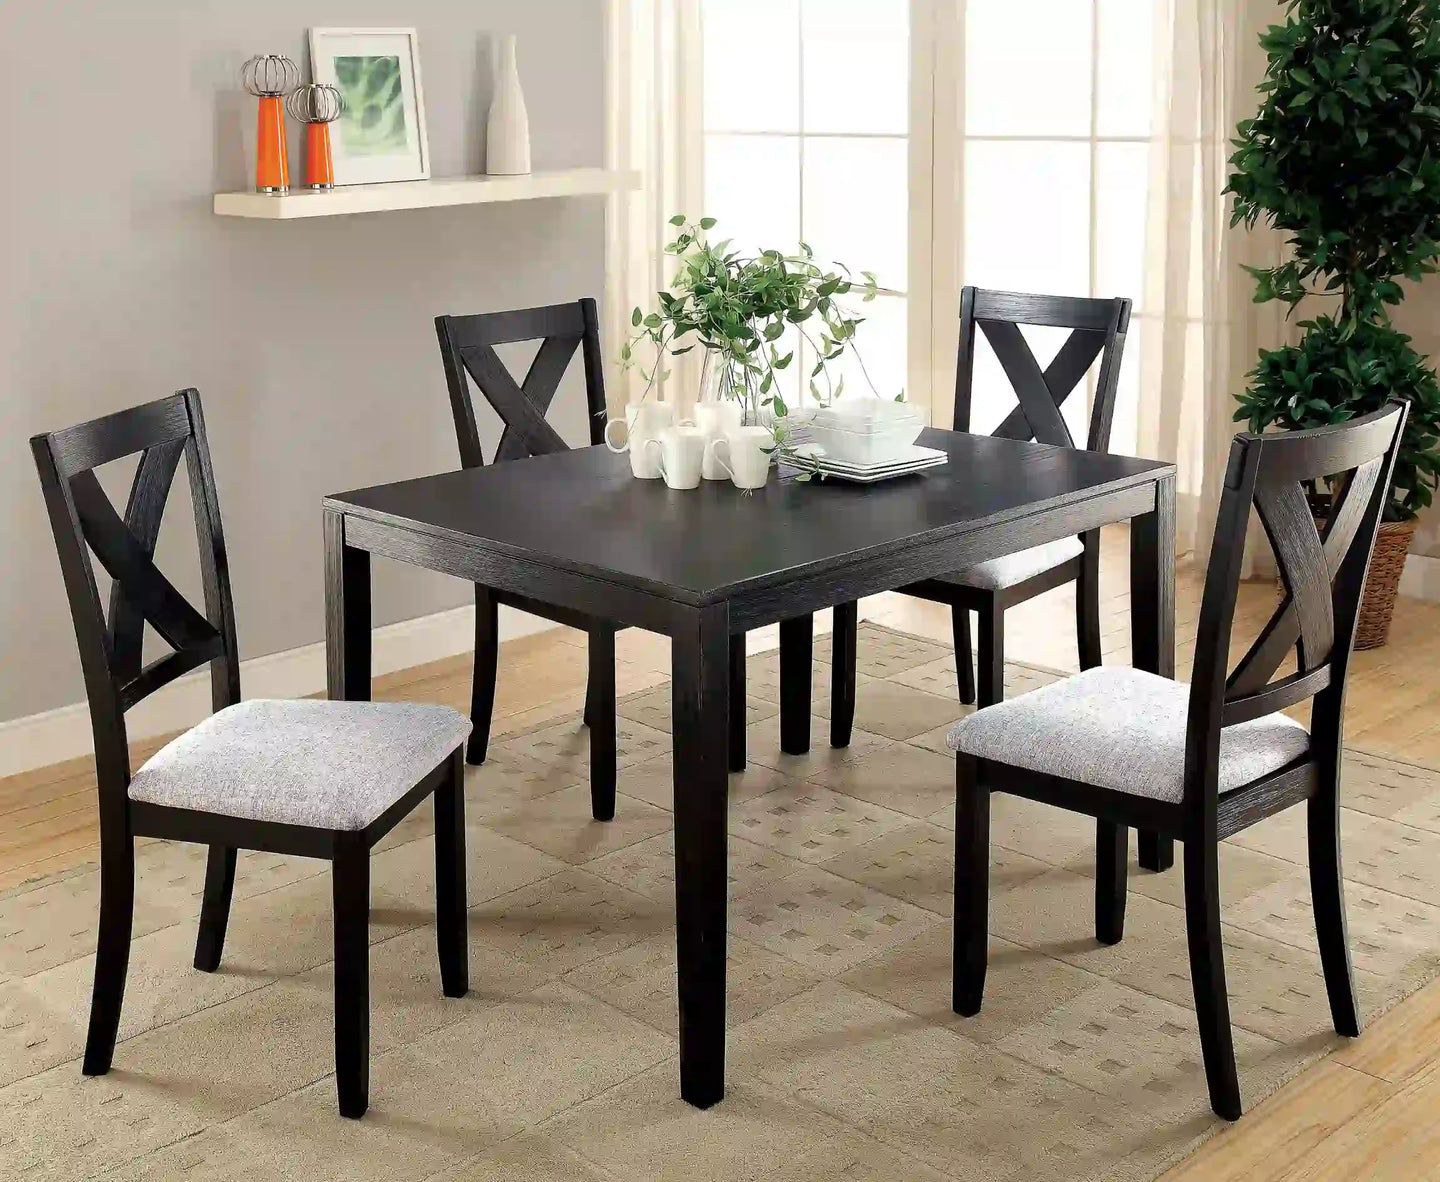 Furniture of America Cameron Transitional 5-Piece Solid Wood Dining Set - IDF-3175T-5PK